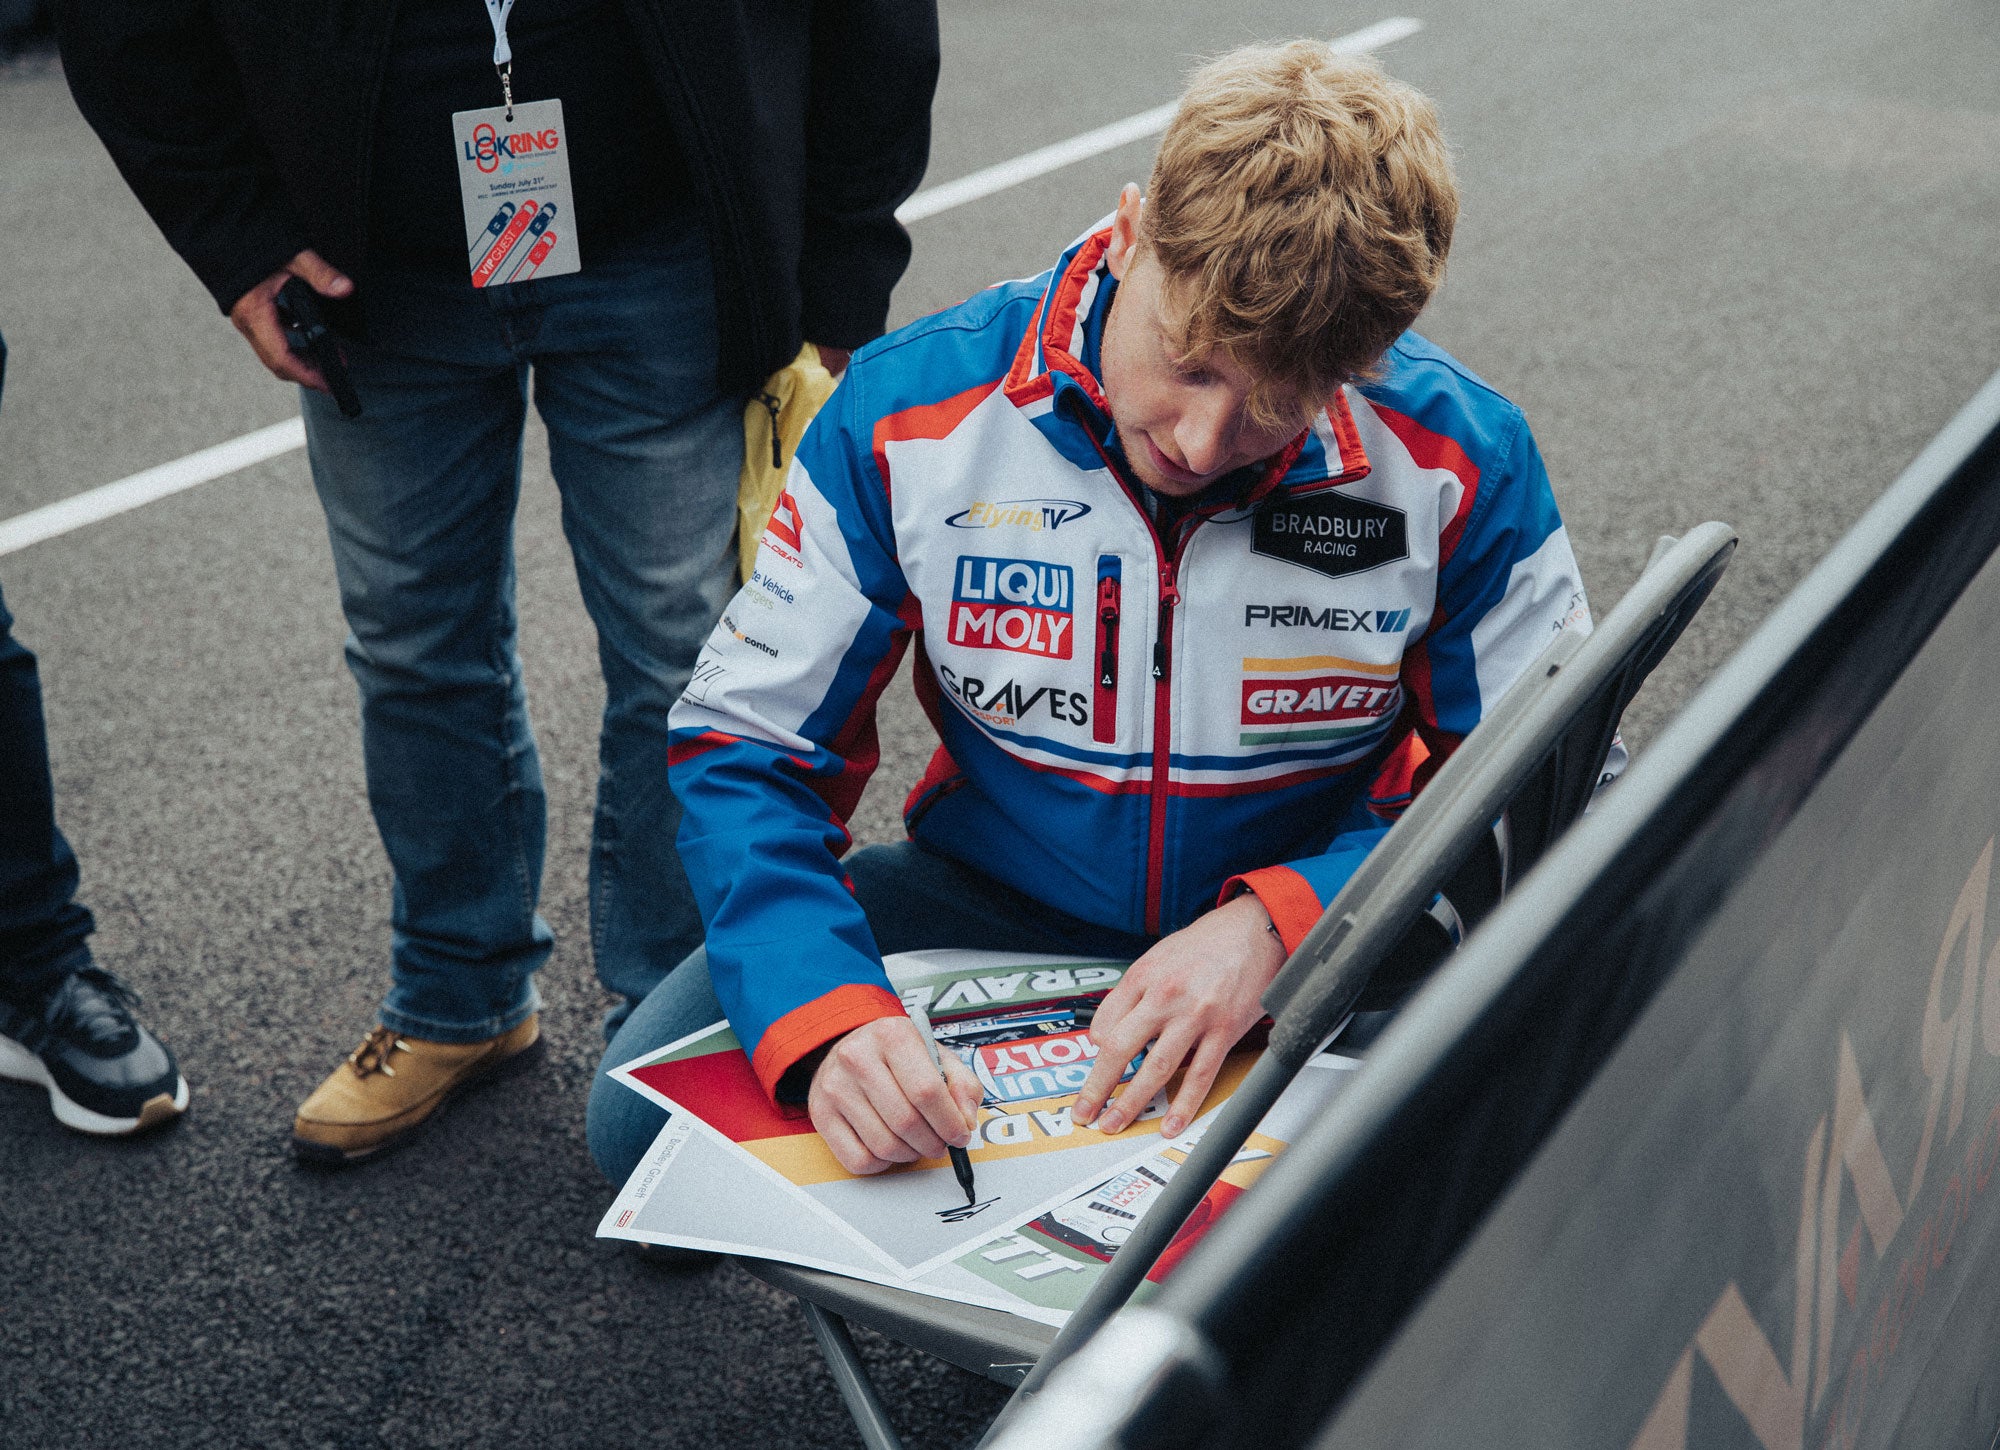 Bradley Gravett son of BTCC British Touring Car Champion Robb Gravett in the MINI Challenge JCW Series at Knockhill in 2022 Bradley Autograph Signing Poster Graves Motorsport Cooper Racing Driver LIQUI MOLY LM Performance Thinking it Better